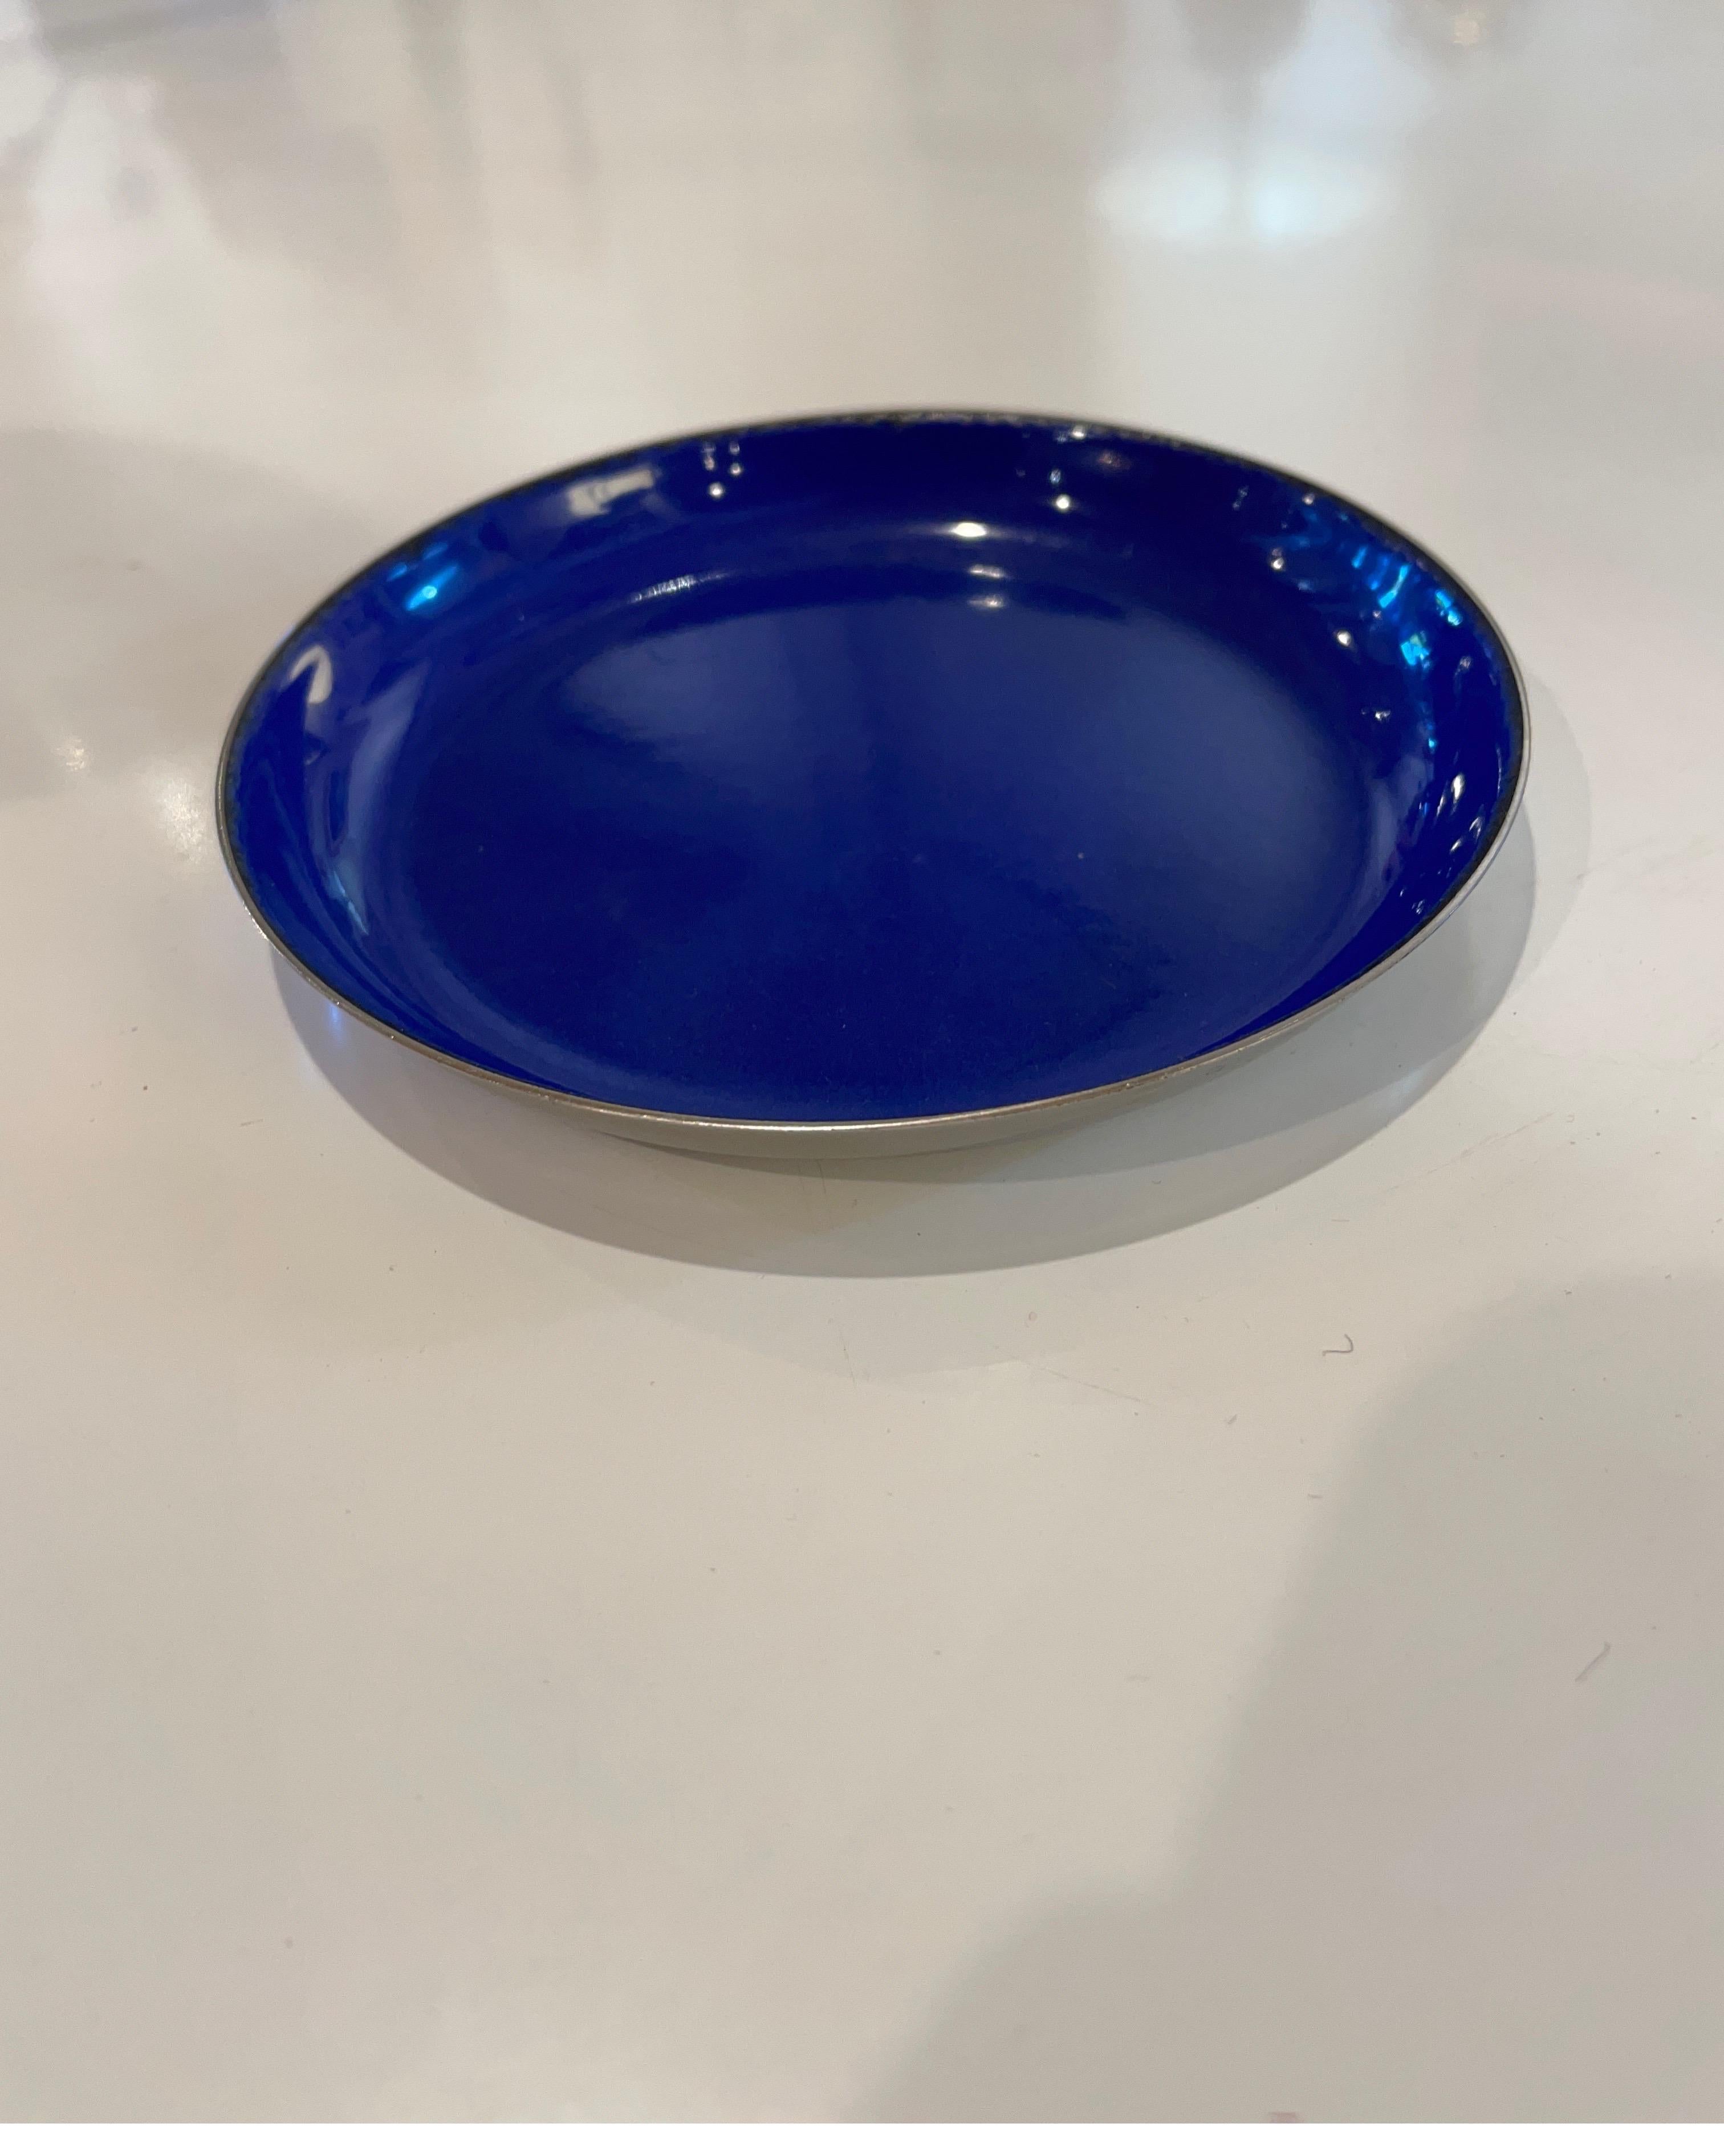 Beautiful and rare polished steel and navy blue enamel bowl by Catherine Holm, circa 1960s made in Norway very nice and clean condition a rare find.